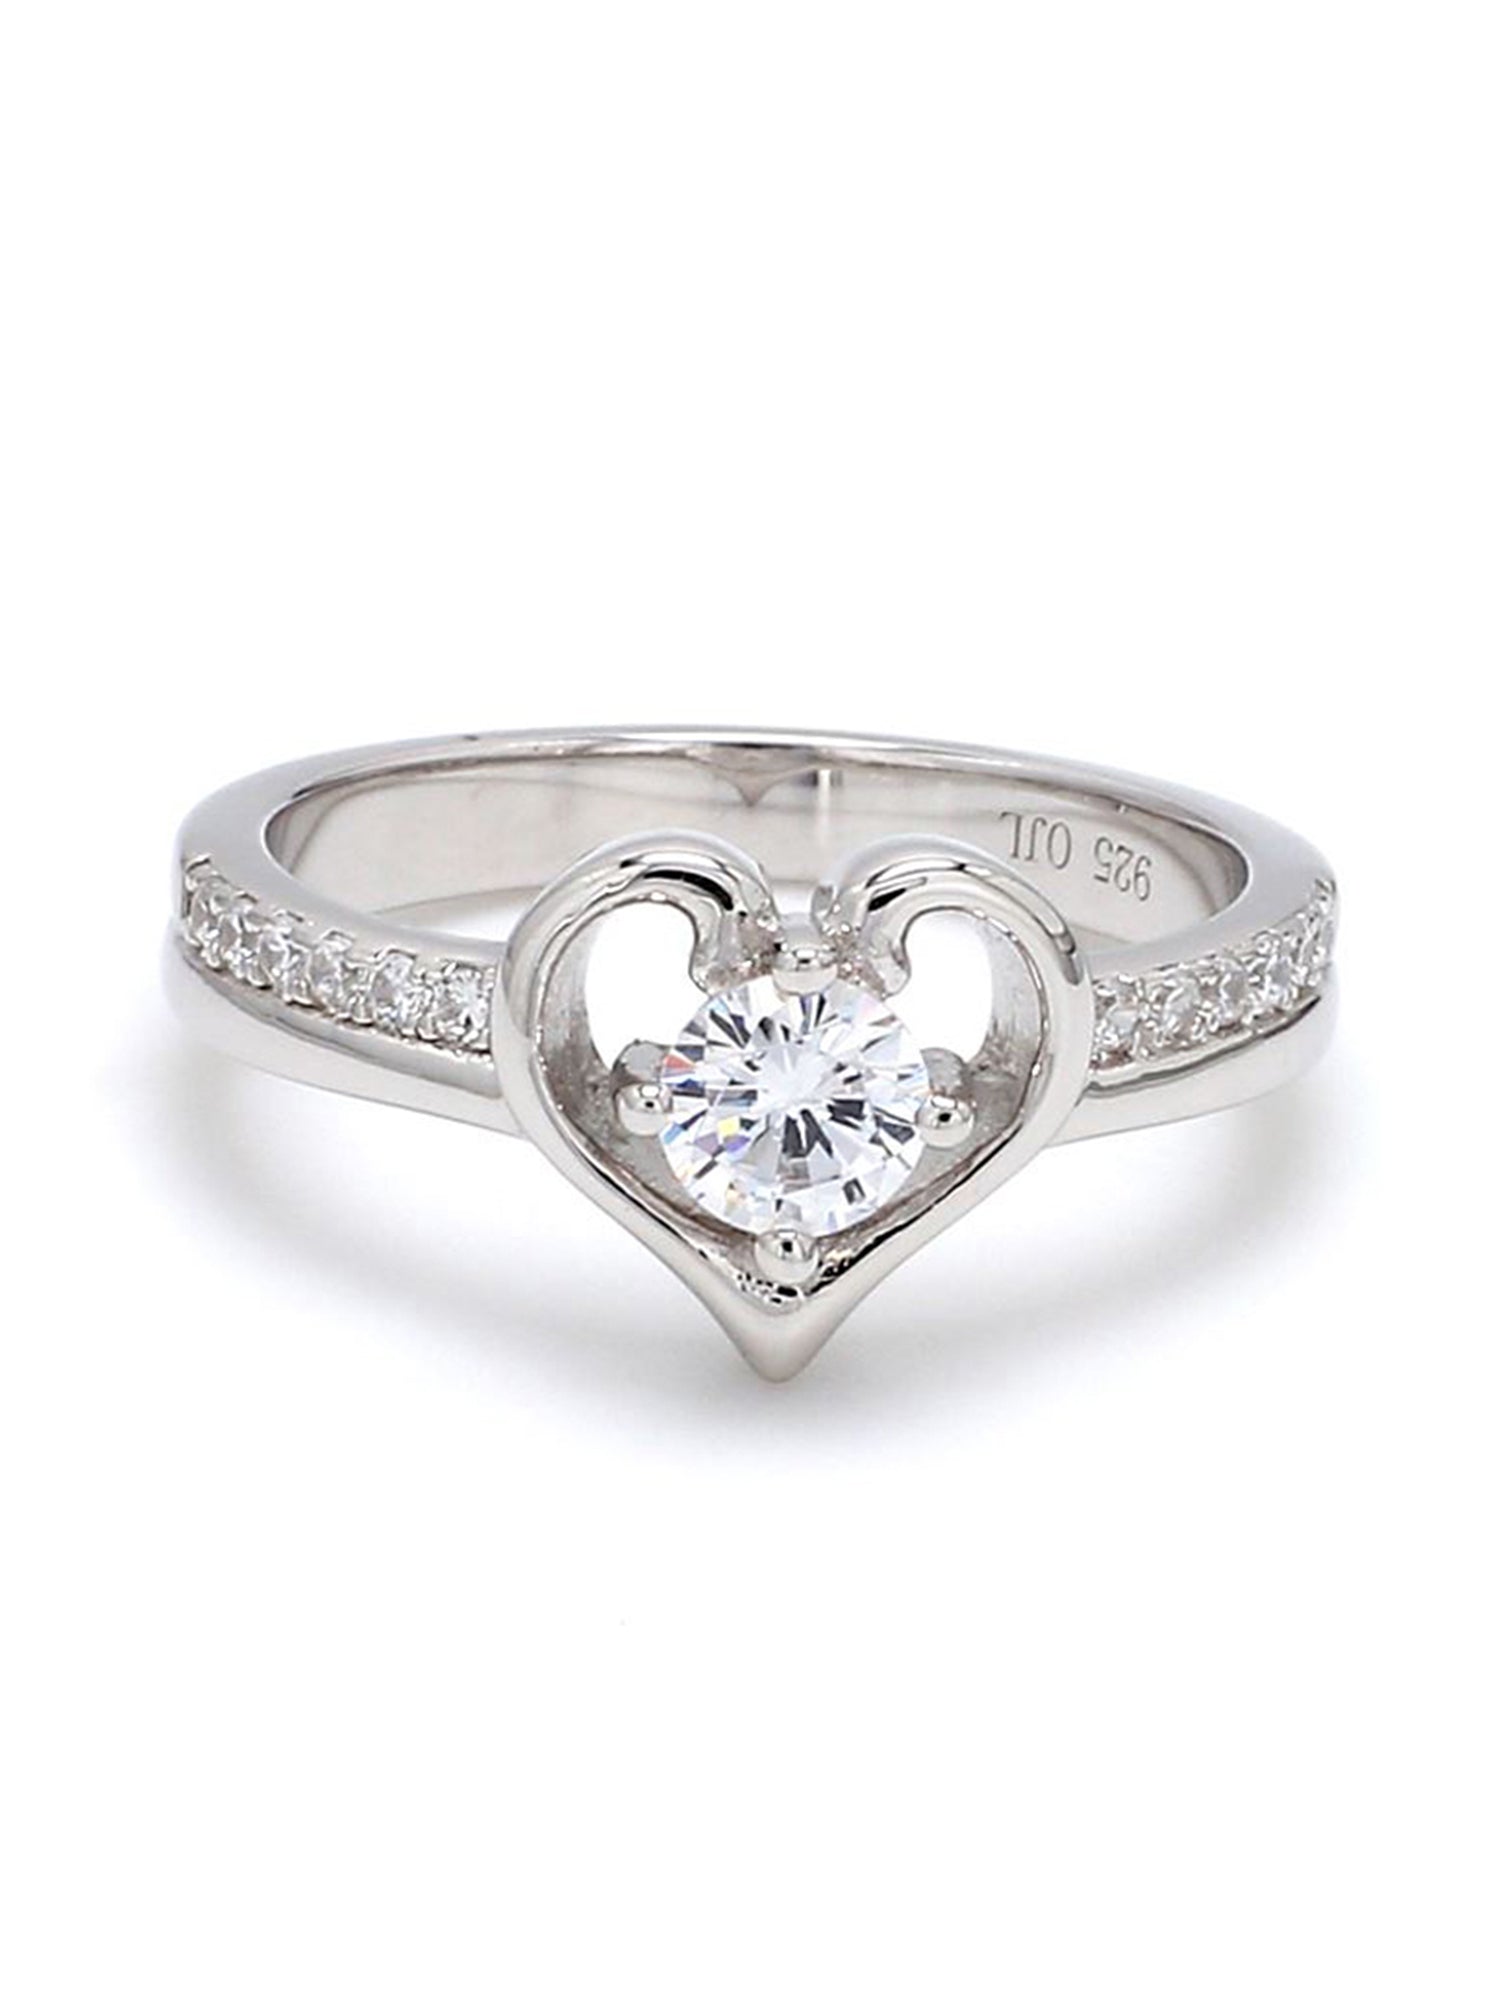 1 CARAT HEART SHAPED LOVE RING IN SILVER-1